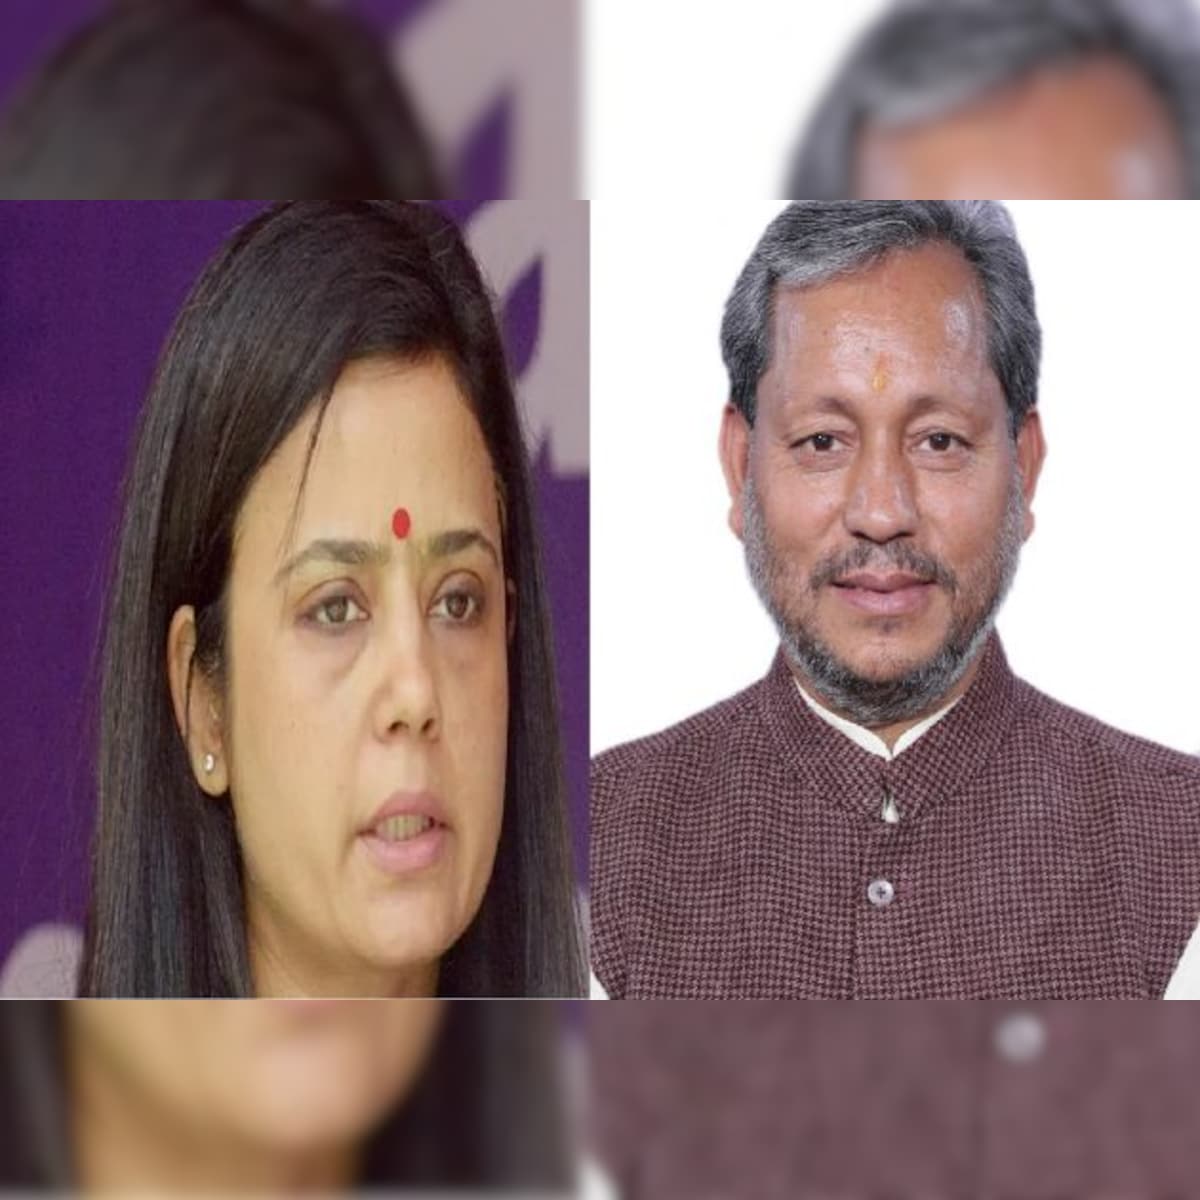 Ripped jeans, 'Besharam aadmi': Mahua Moitra rips into Uttarakhand CM for  his comment on women wearing ripped jeans